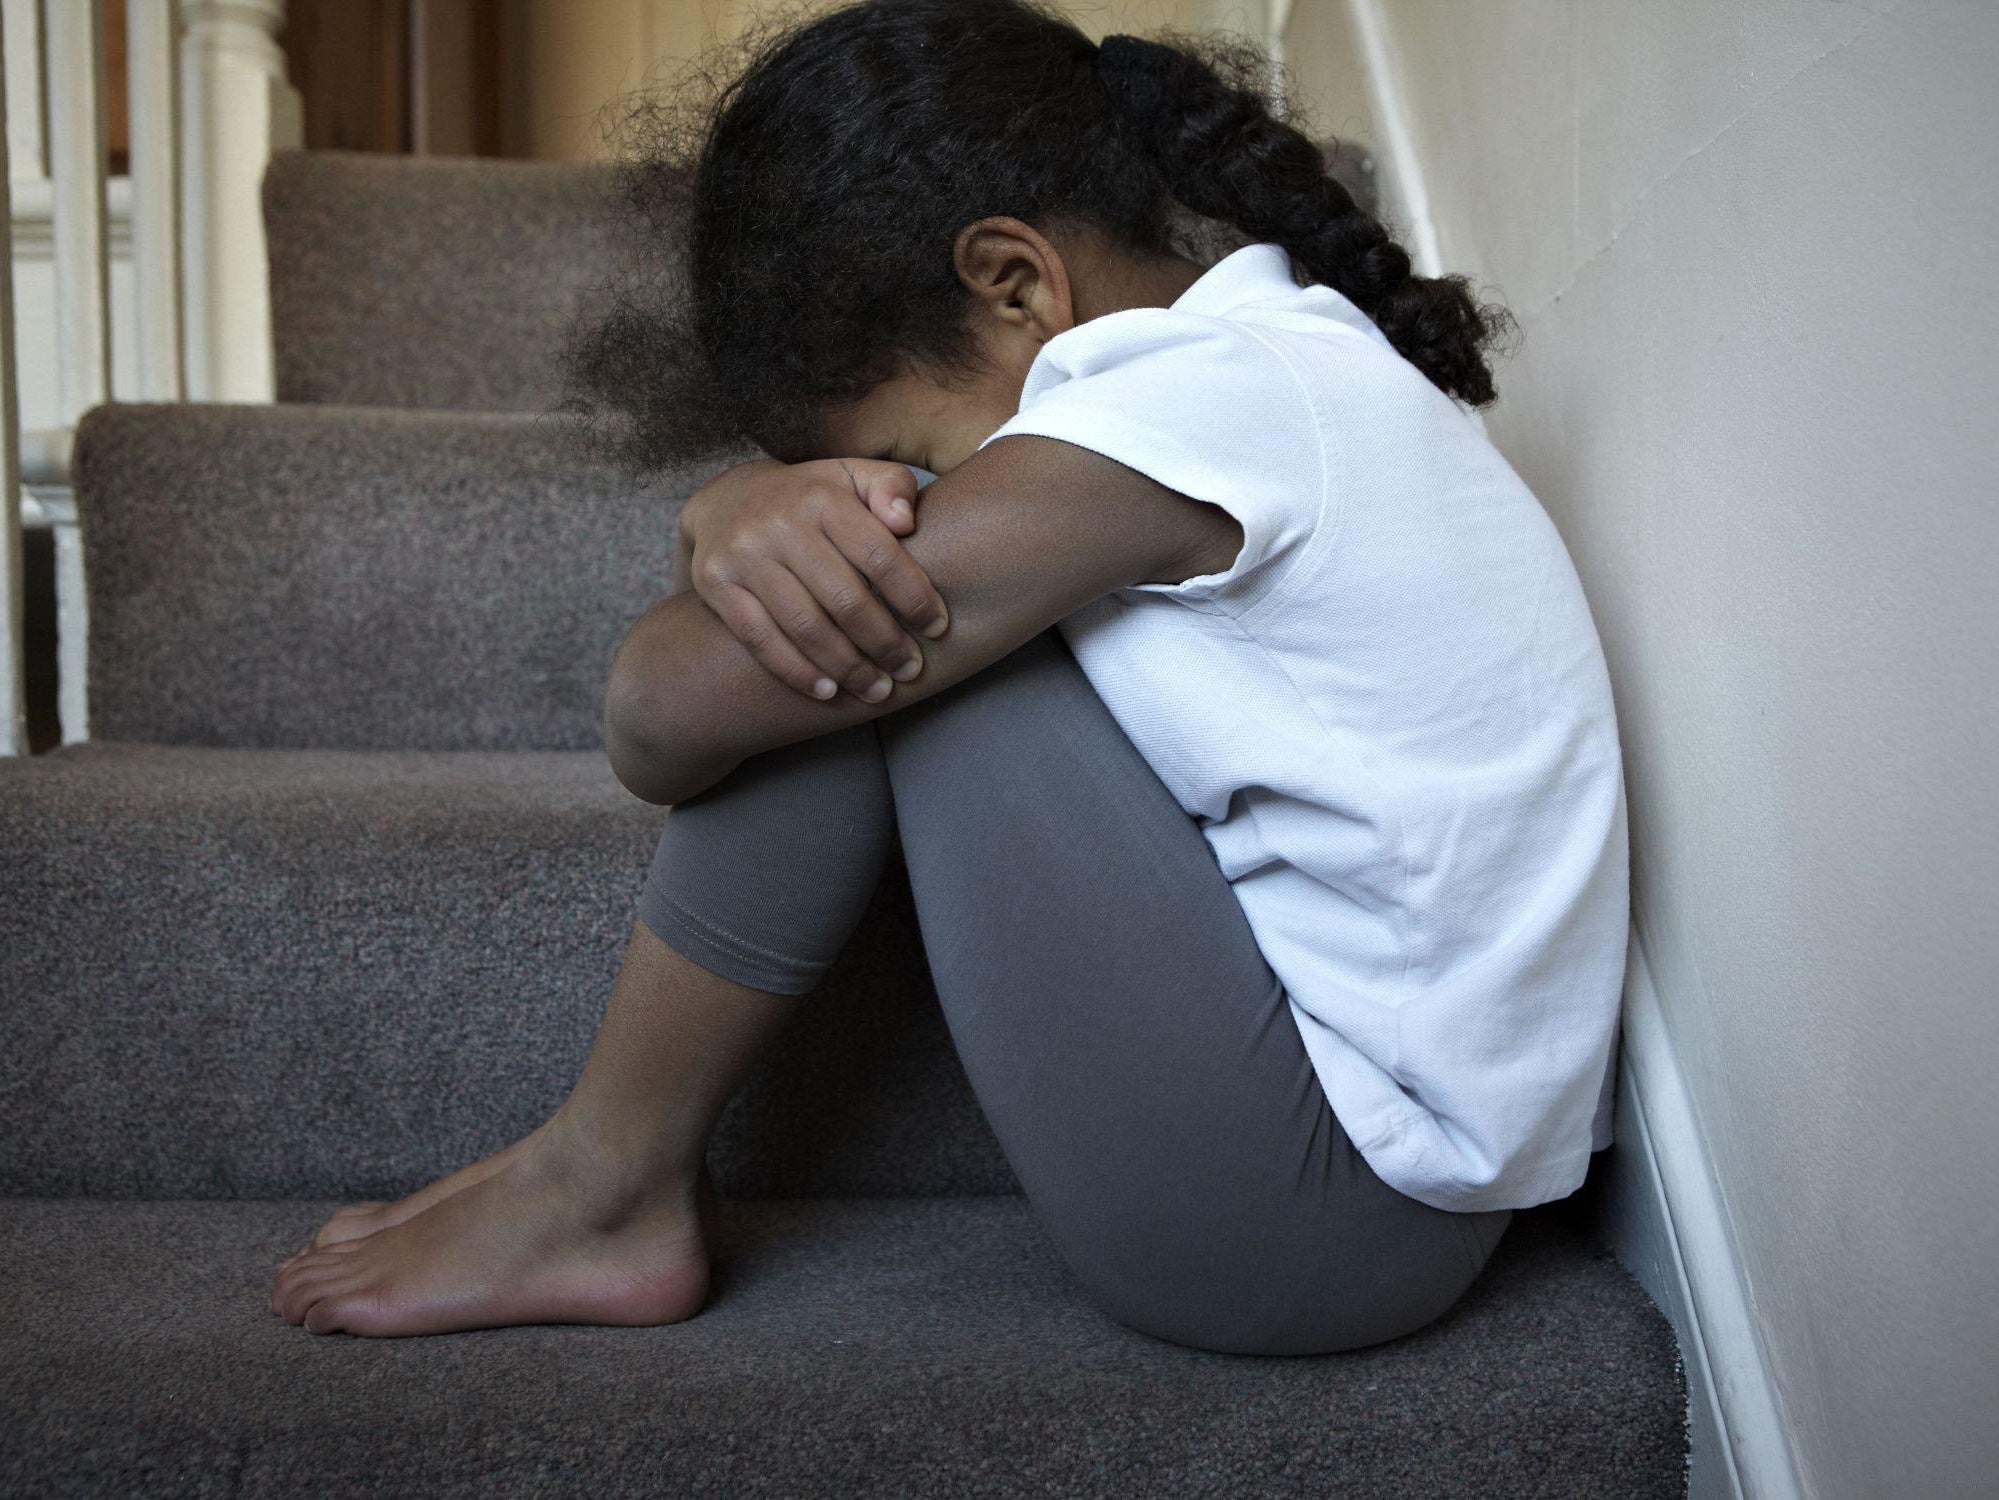 The NSPCC said that Childline delivered more than 500 counselling sessions last year where children and young people reported they were smacked or hit by parents and carers